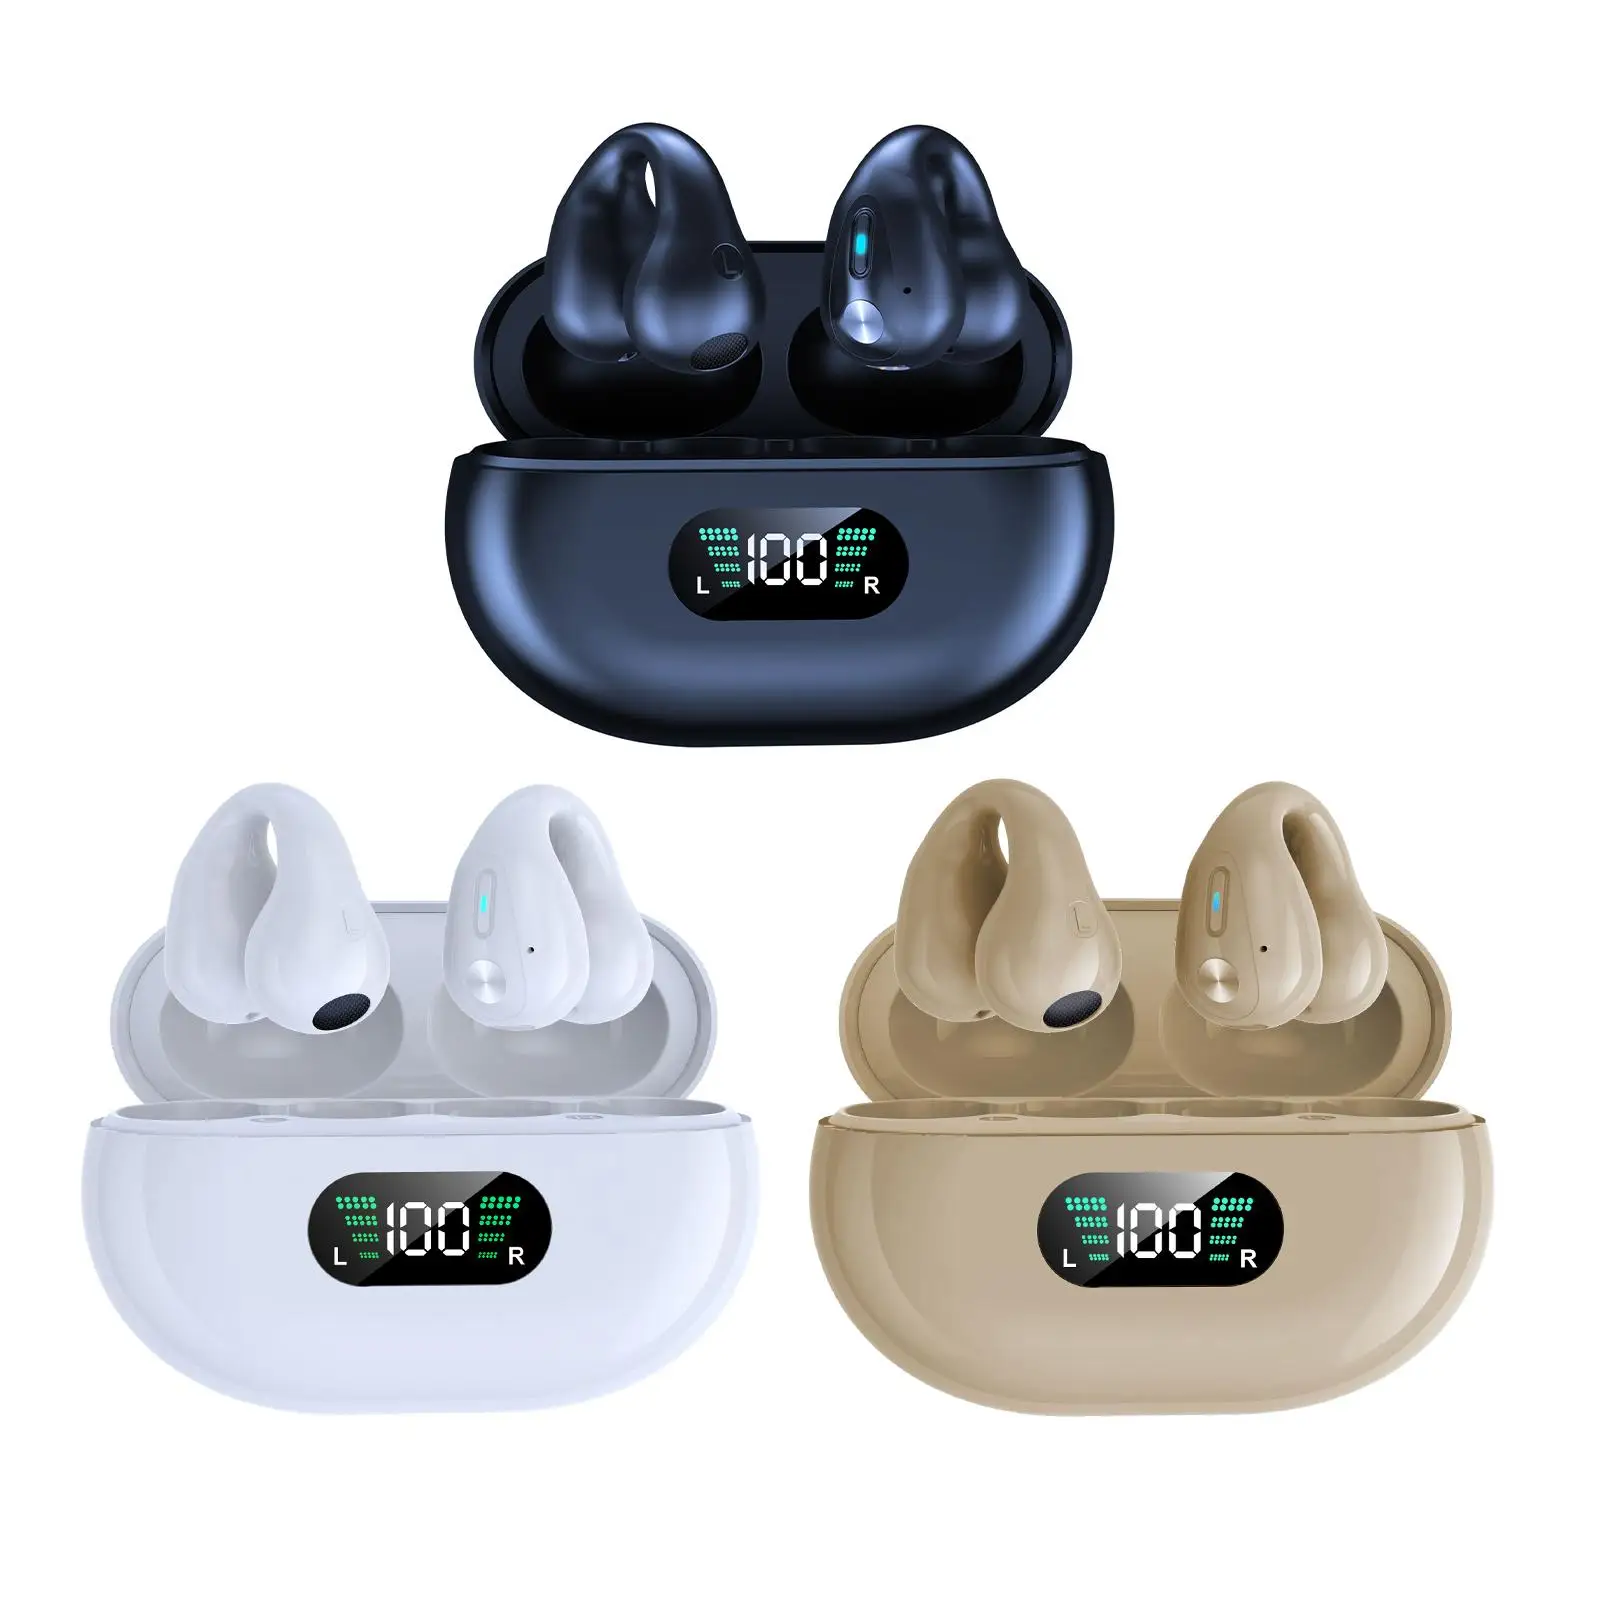 Auto Pairing Ear Clip Headphones Built in Mic Stereo Sound Noise Reduction Handsfree Calling V5.3 Headsets for Driving Sports